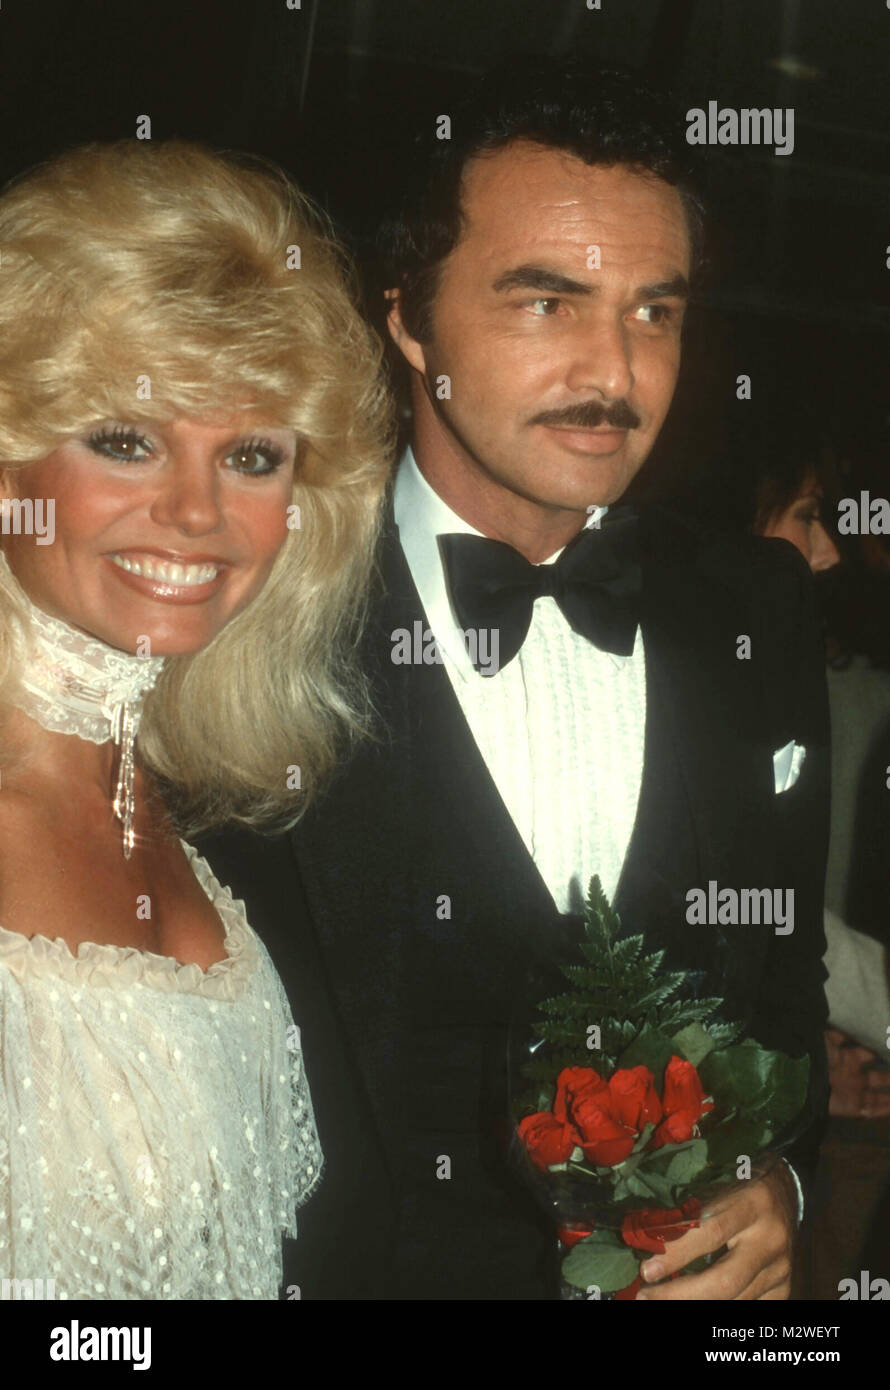 LOS ANGELES, CA - MAY 13: (L-R) Actress Loni Anderson and actor Burt Reynolds attend the Rudolph Valentino Awards at the Century Plaza Hotel on May 13, 1982 in Los Angeles, California. Photo by Barry King/Alamy Stock Photo Stock Photo